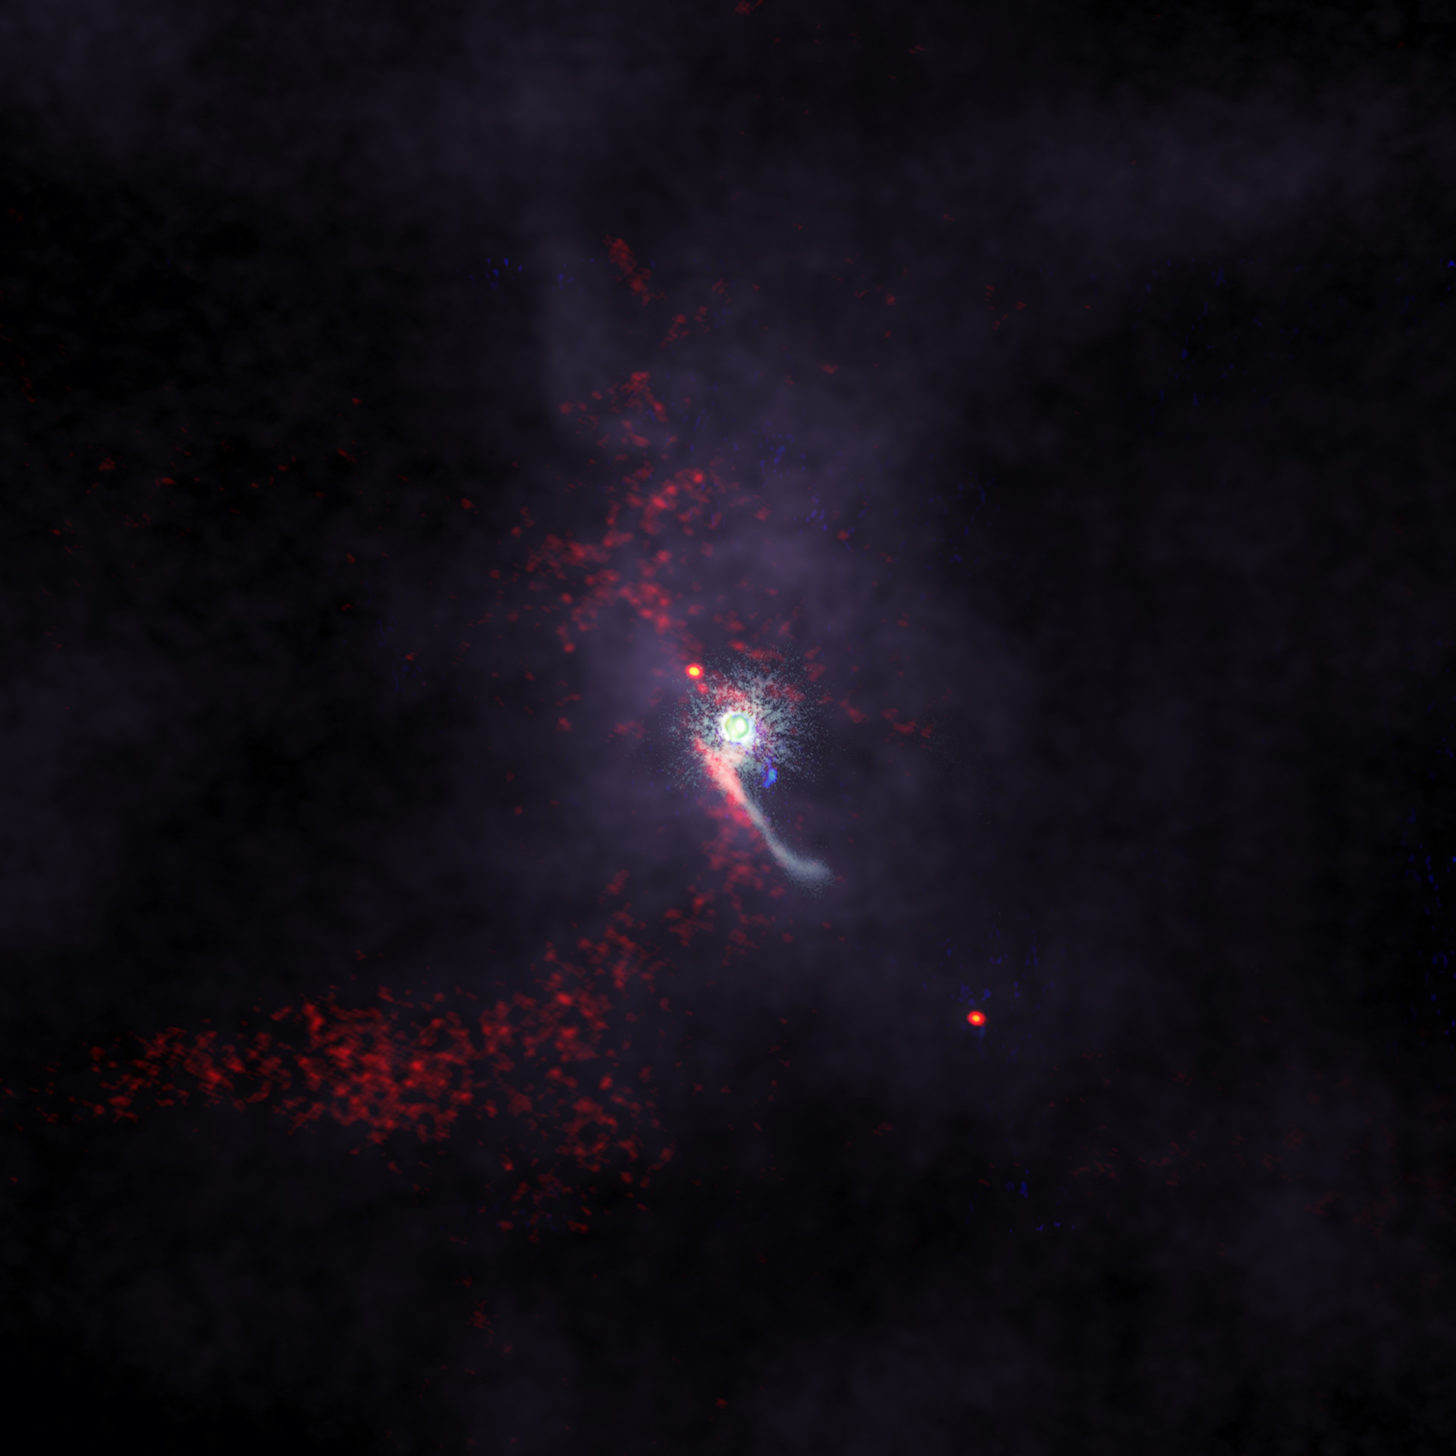 https://in-space.ru/wp-content/uploads/2022/01/NRAO21ao24_Ruobing-Dong_ScienceImage_Composite-1456x1456.jpg